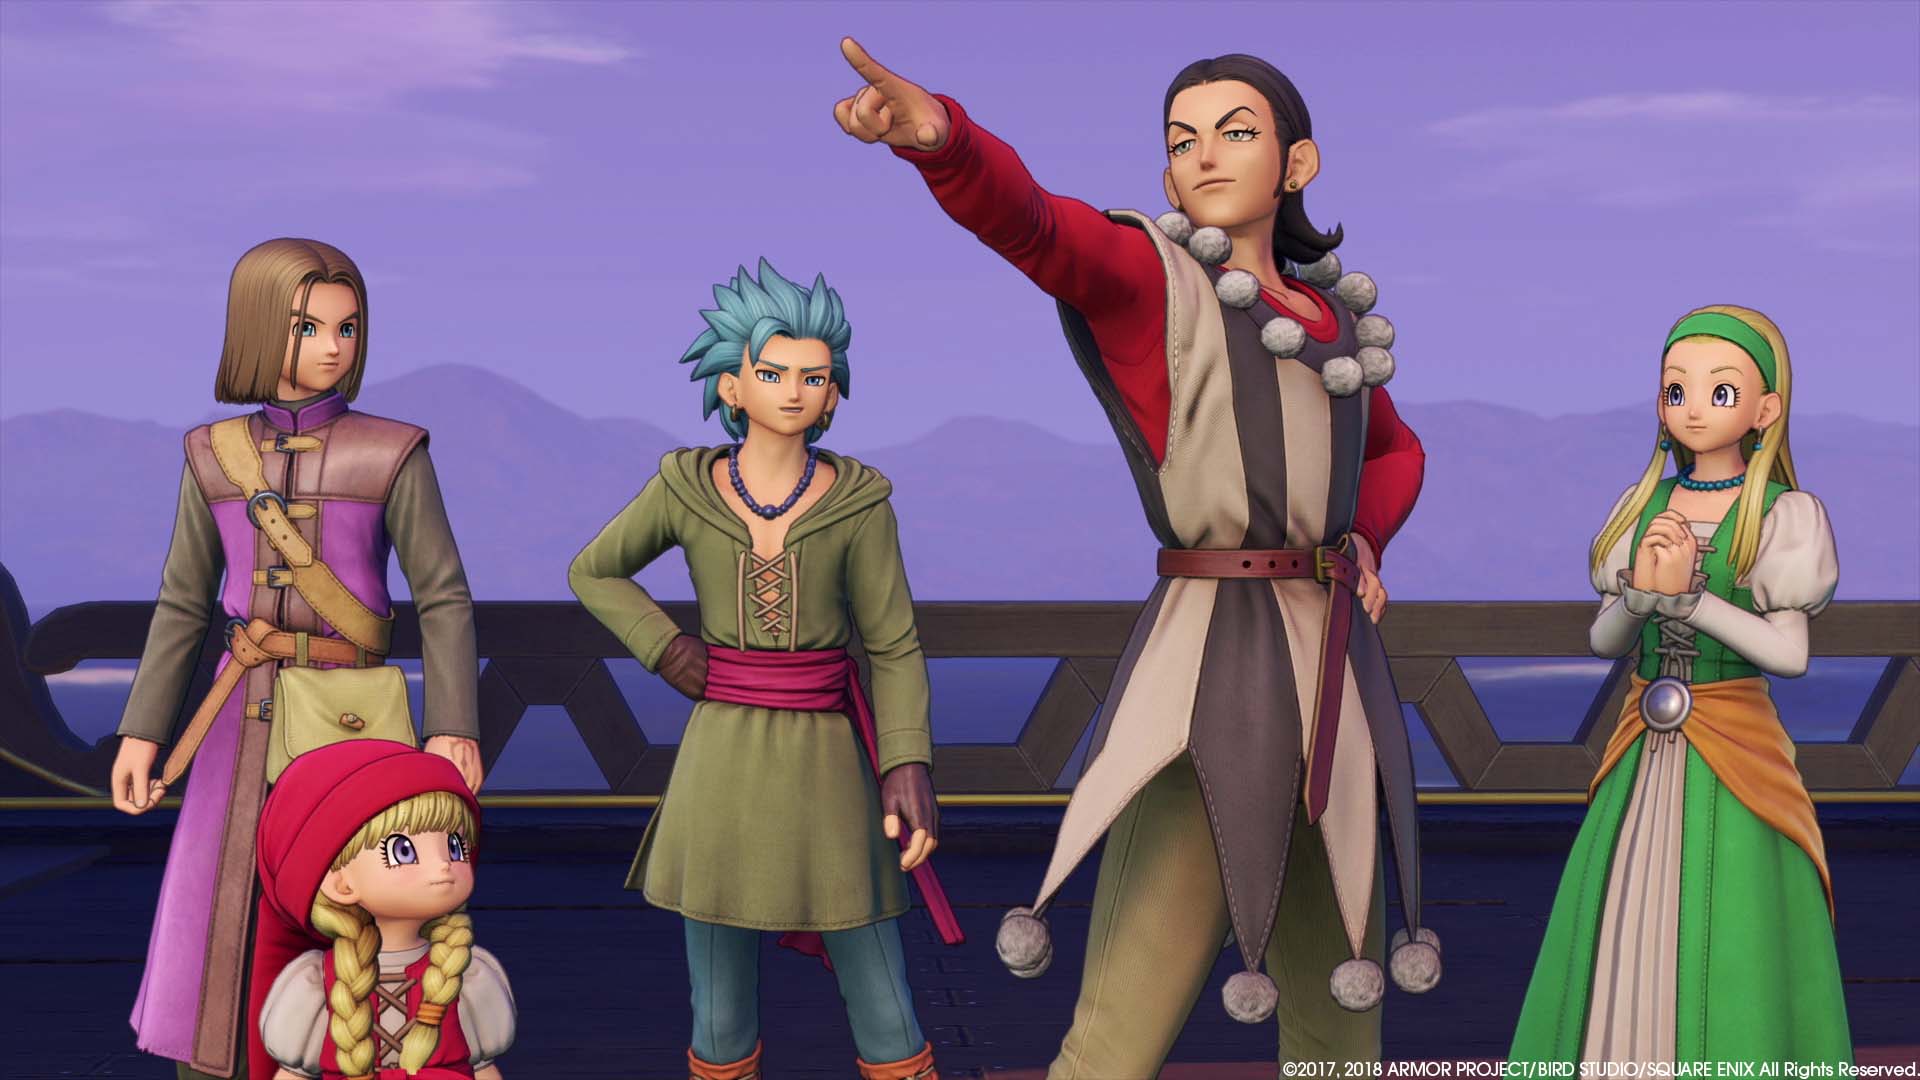 DRAGON QUEST XI: Echoes of an Elusive Age - Digital Edition of Light screenshot